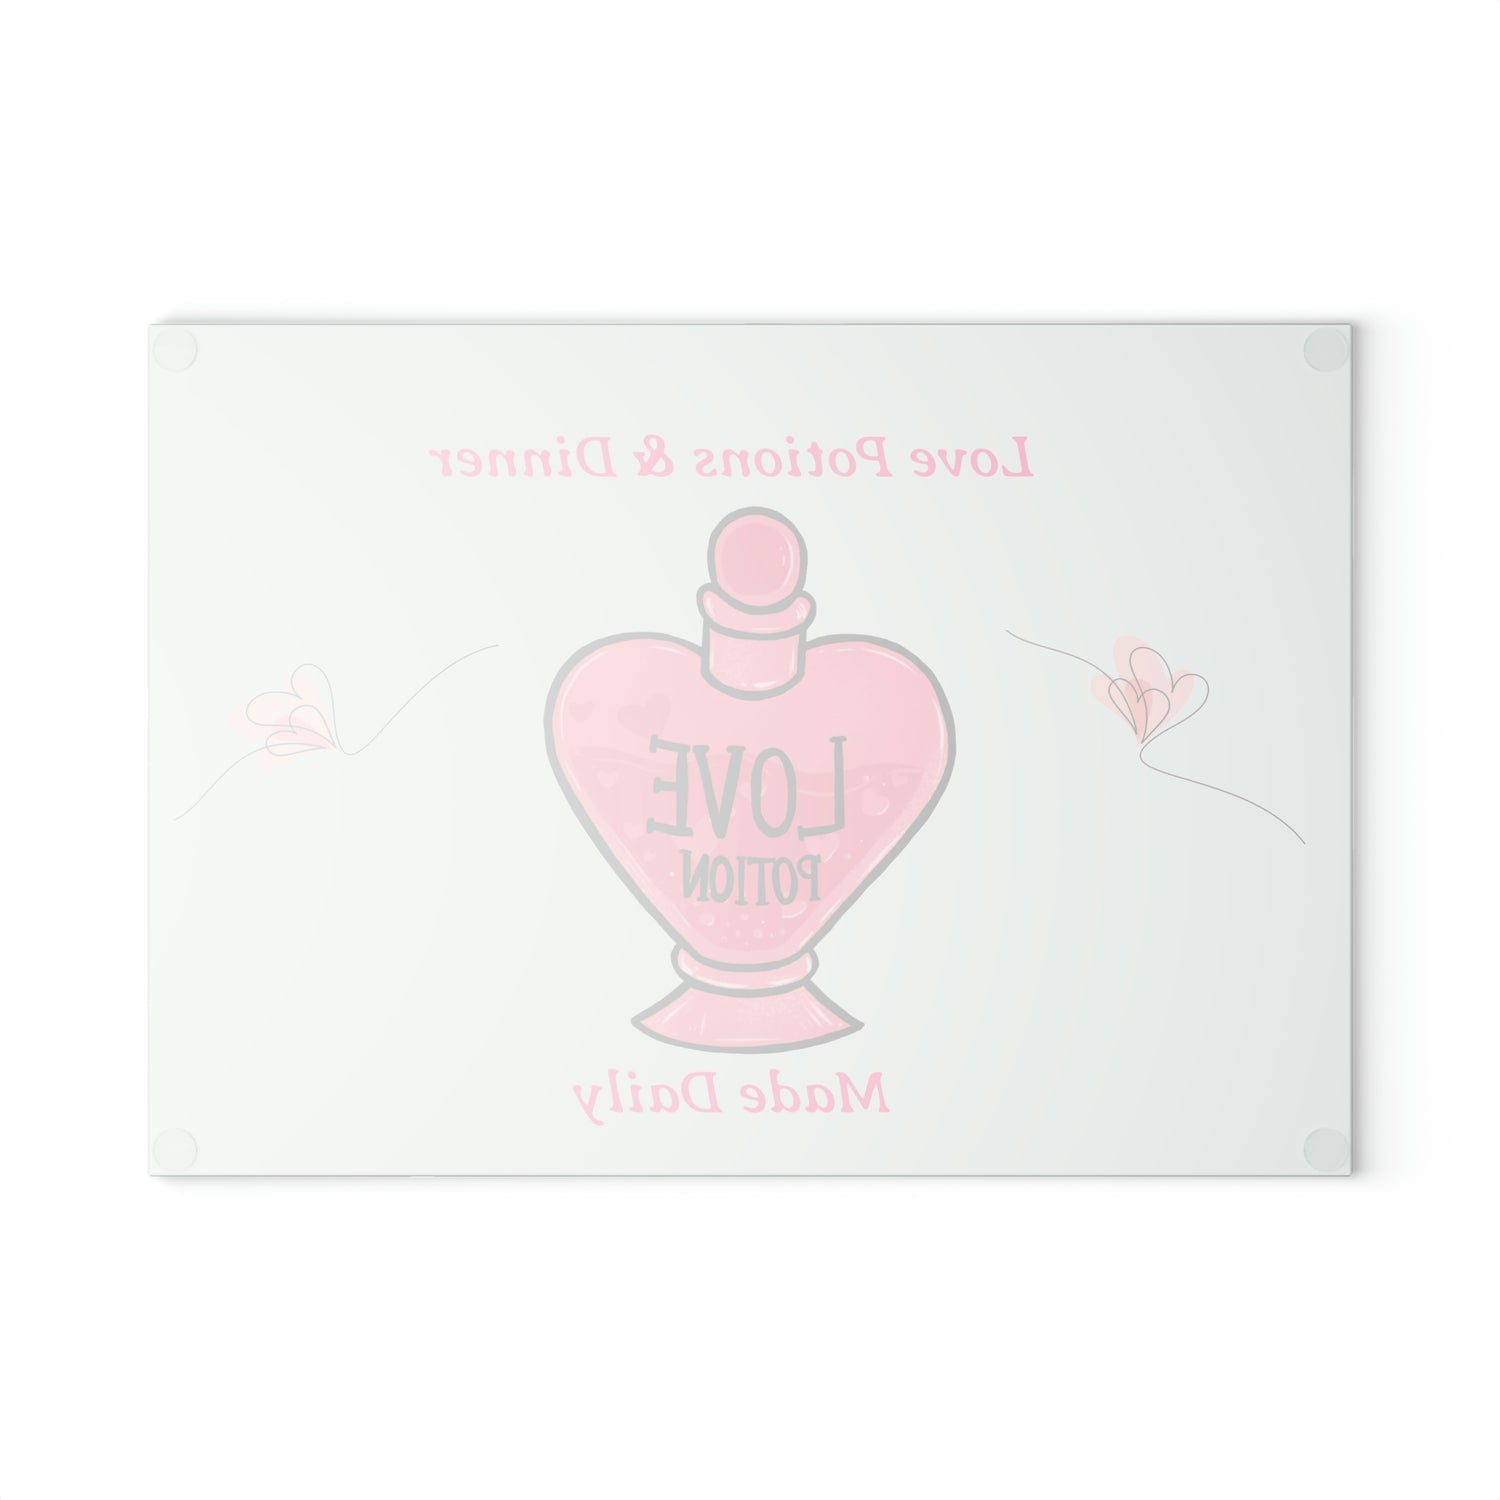 Love & Dinner Glass Cutting Board - Witchy Kitchens